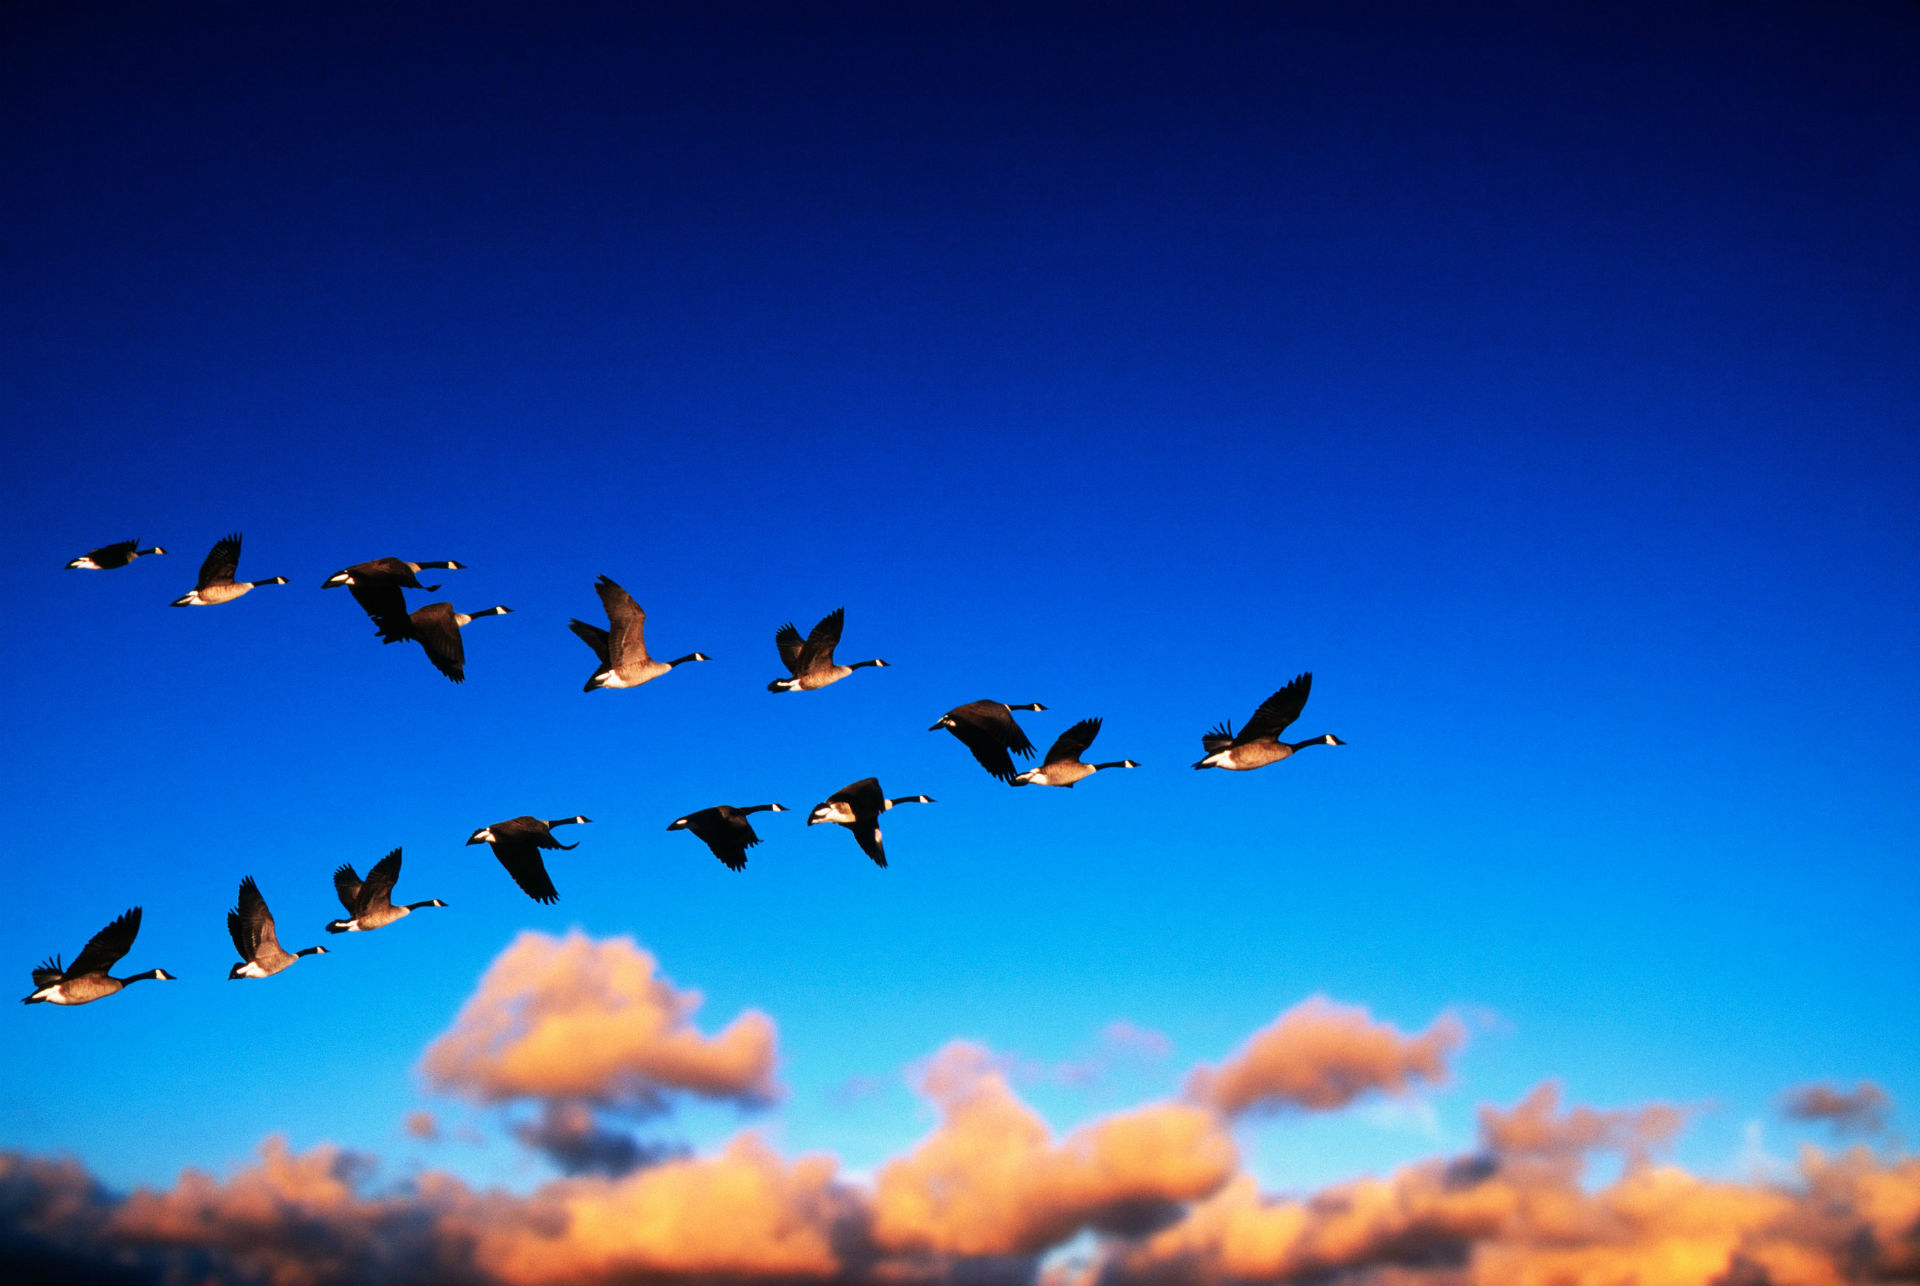 Geese Flight Migration Sky Clouds Wallpaper Background